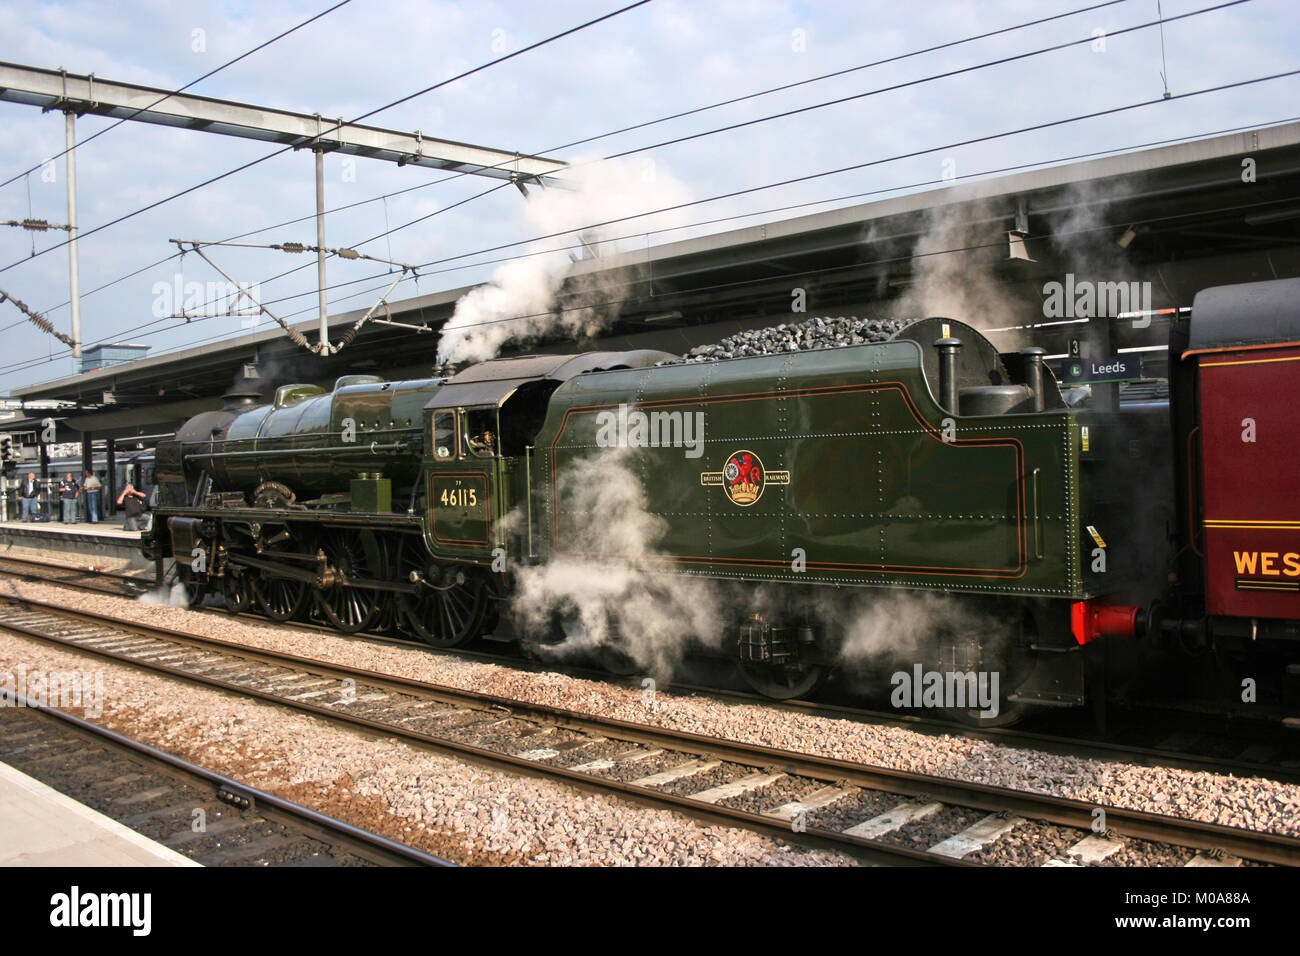 Royal Scot Steam Locomotive - Scots Guardsman at Leeds Station - 26th June 2010 with White Rose Charter - Leeds, United Kingdom Stock Photo